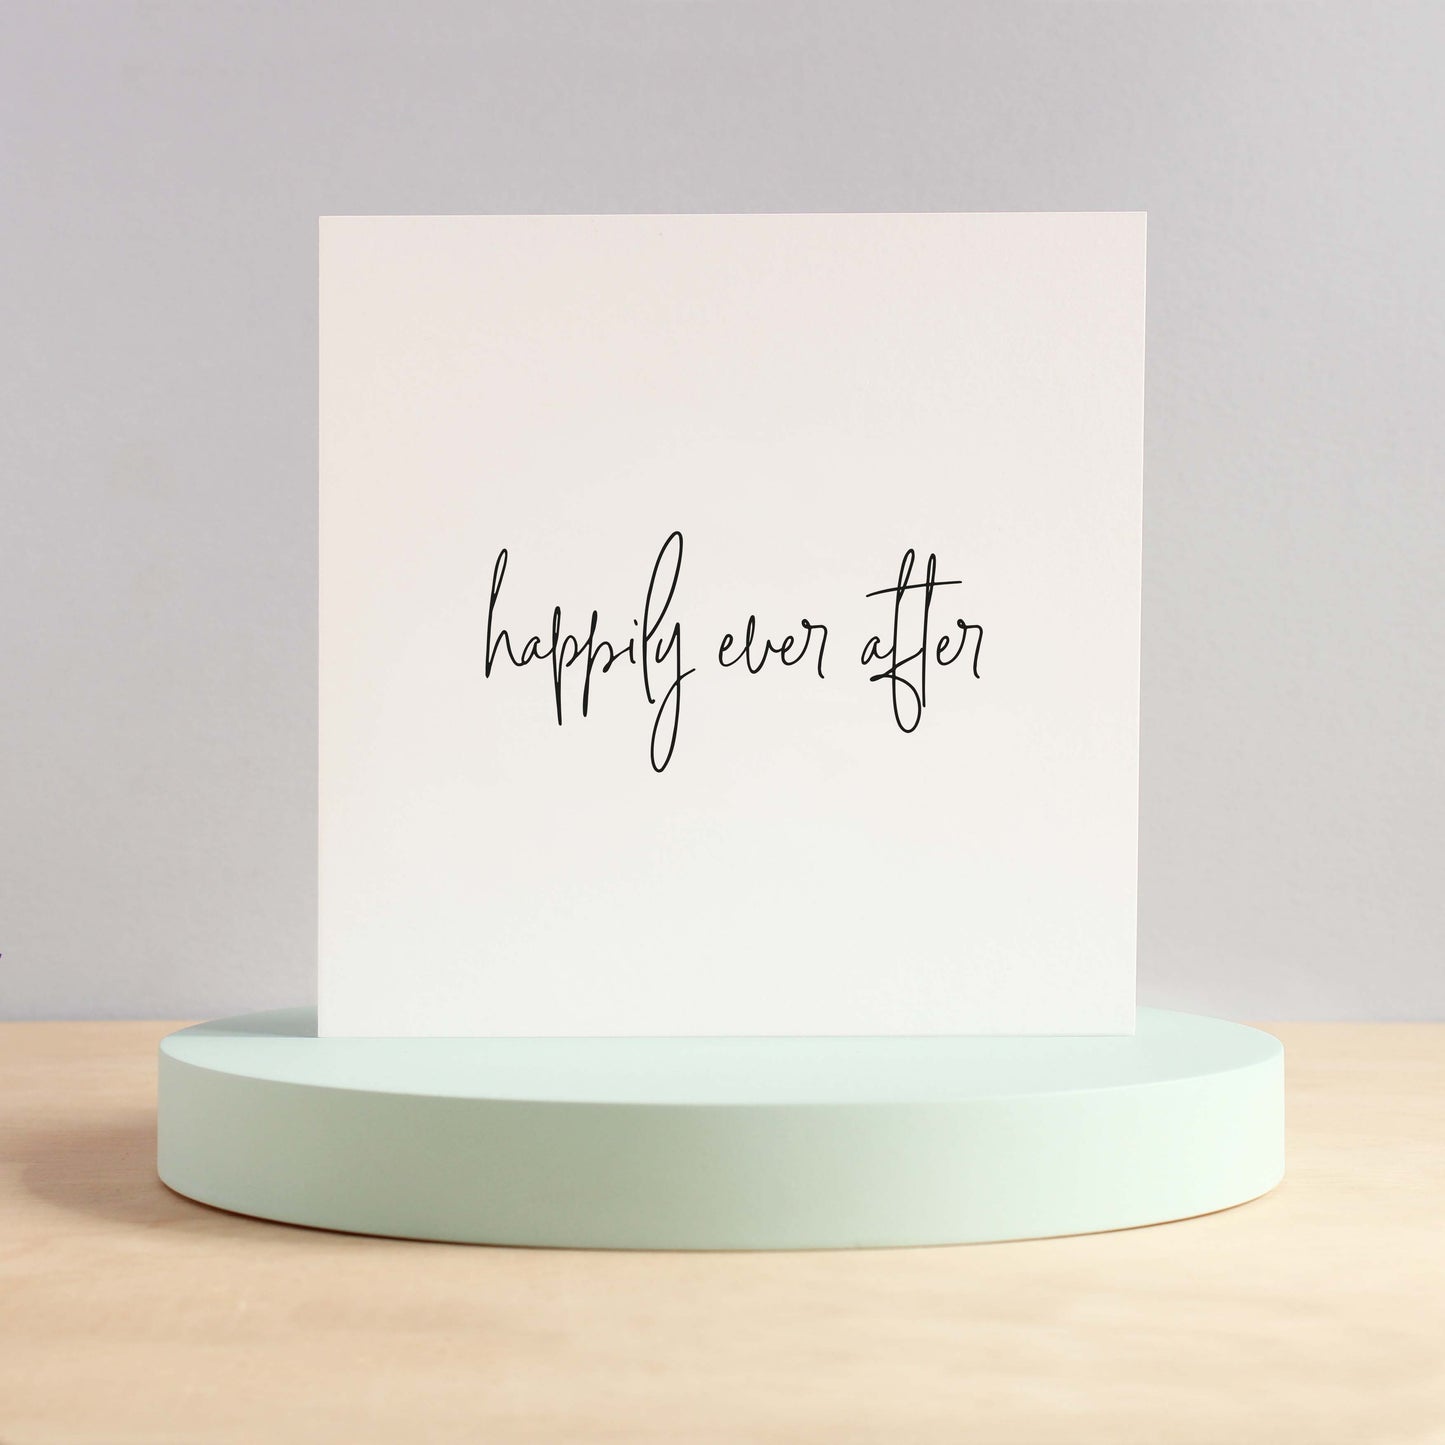 Happily ever after card